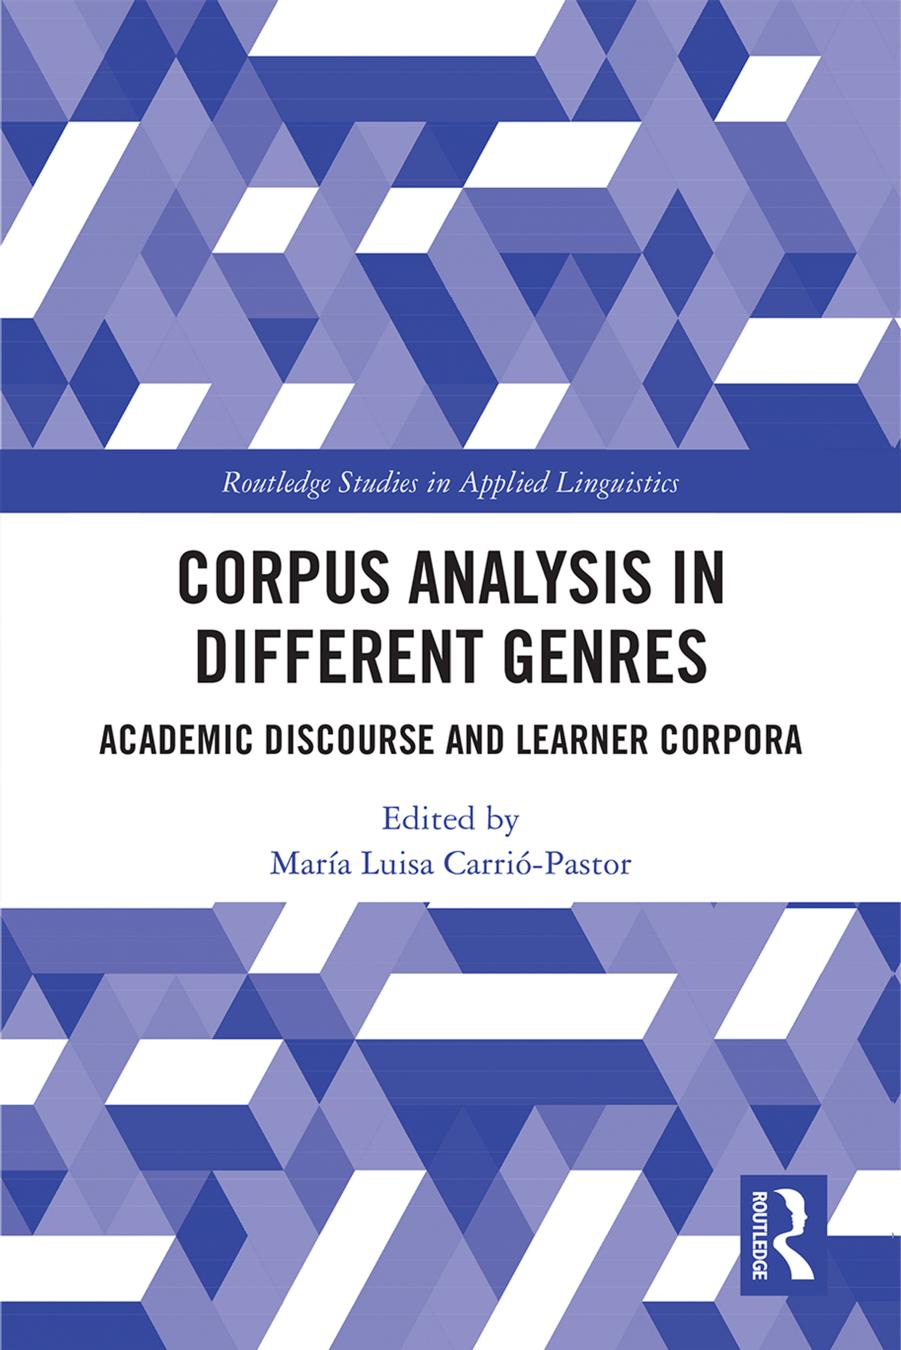 (eBook PDF)Corpus Analysis in Different Genres: Academic Discourse and Learner Corpora by María Luisa Carrió-Pastor